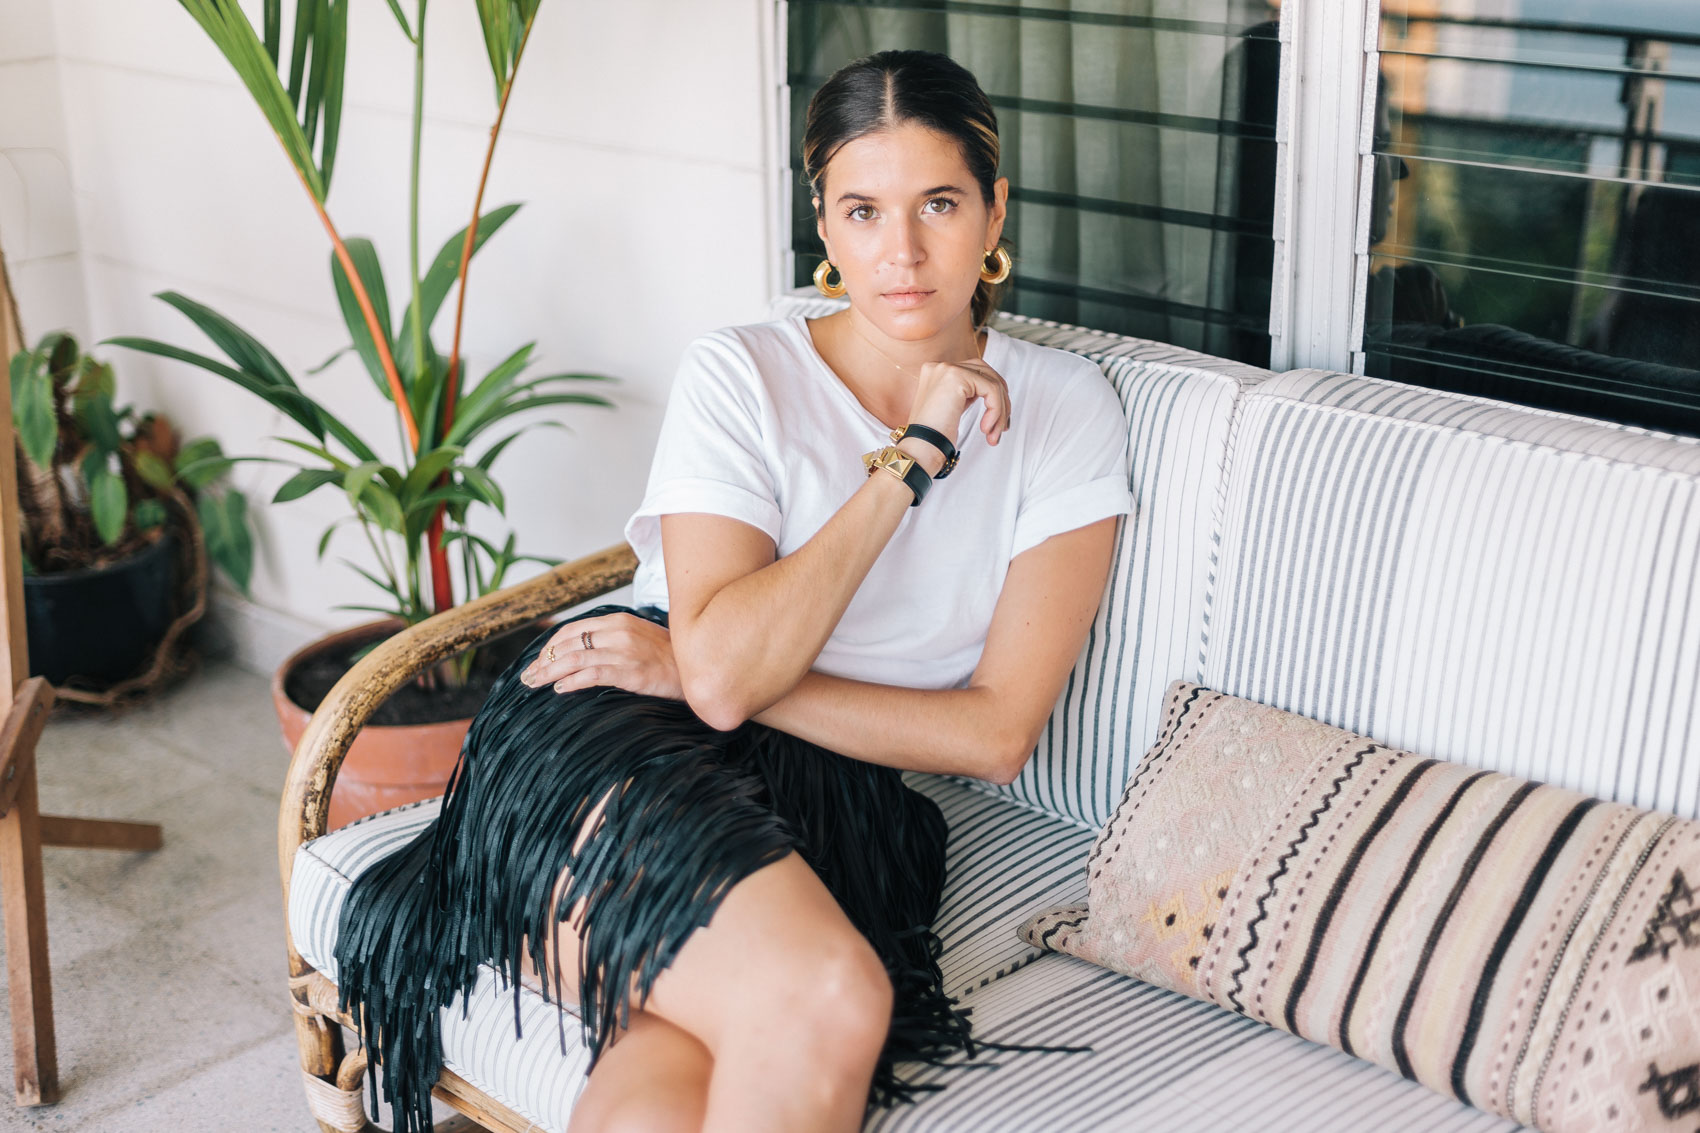 Black and white outfit idea by Maristella Gonzalez, featuring a fringe leather mini skirt and bracelets from Saint Laurent, basic white t-shirt from Cheap Monday